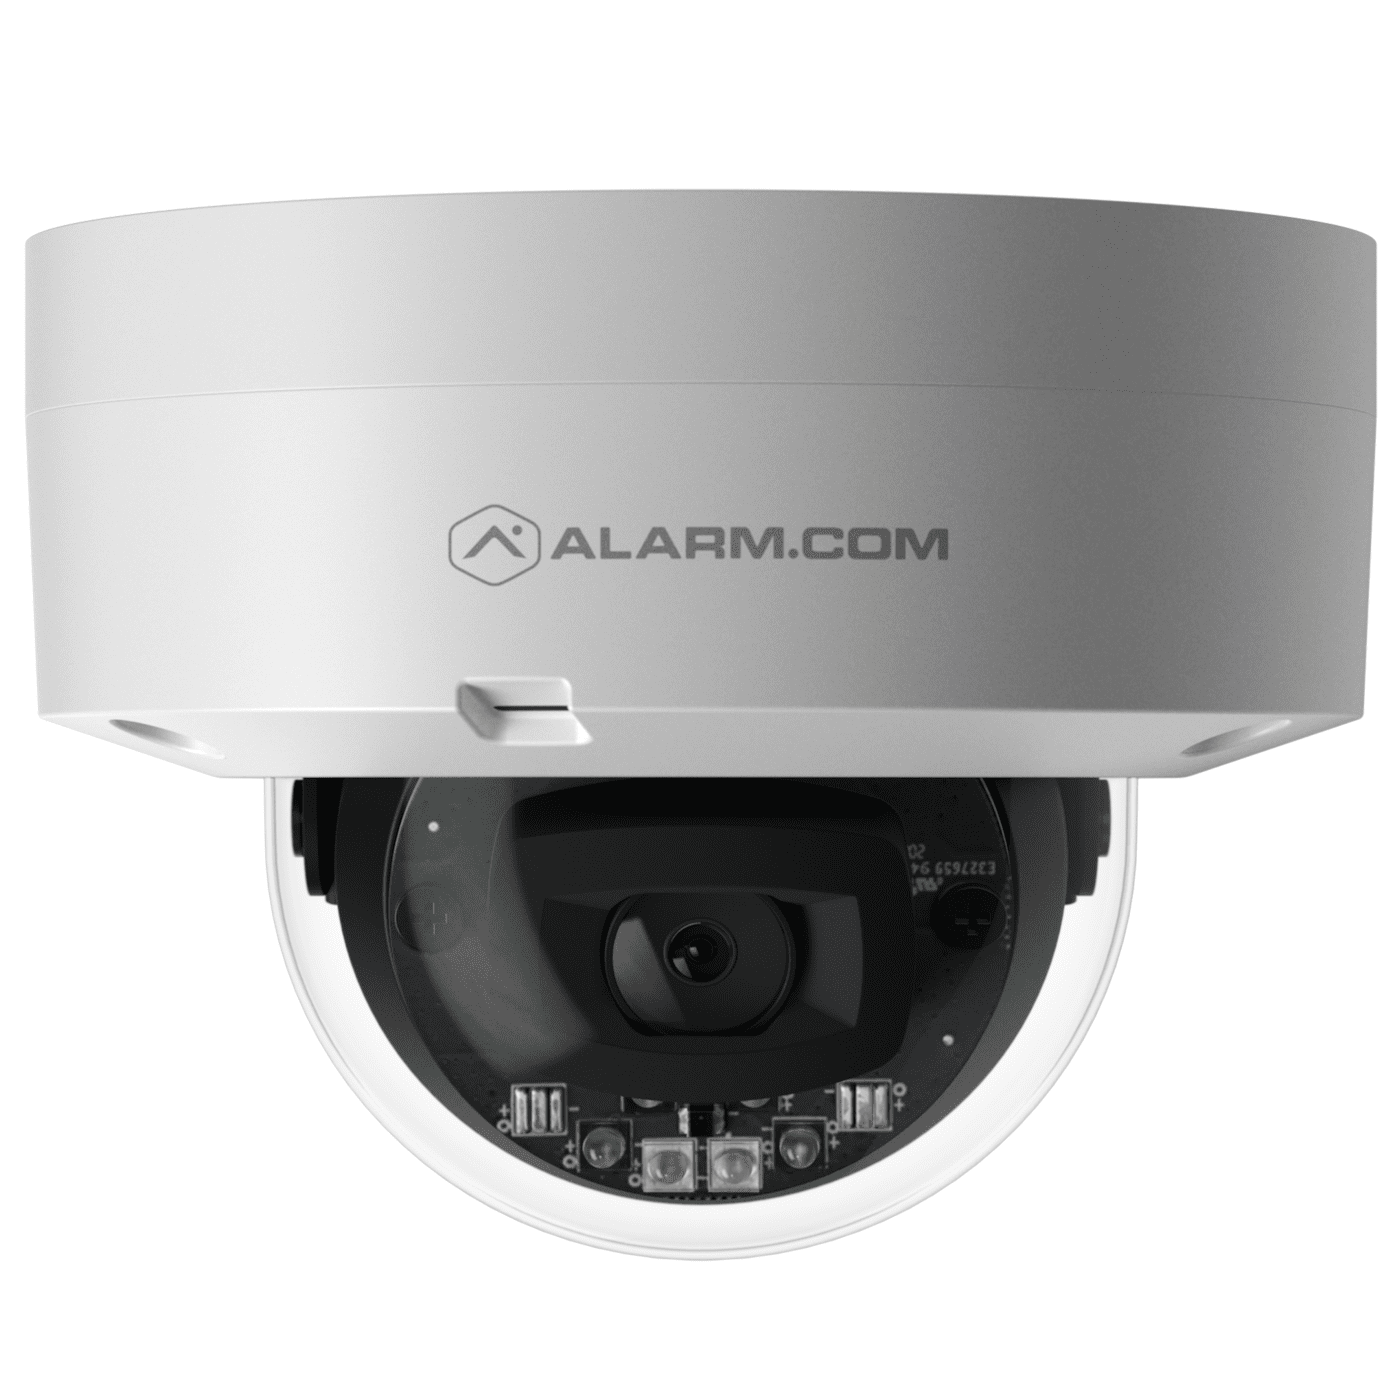 Alarm.com Pro Series Indoor/Outdoor Fixed Lens 2MP Dome PoE Security Camera ADC-VC827P